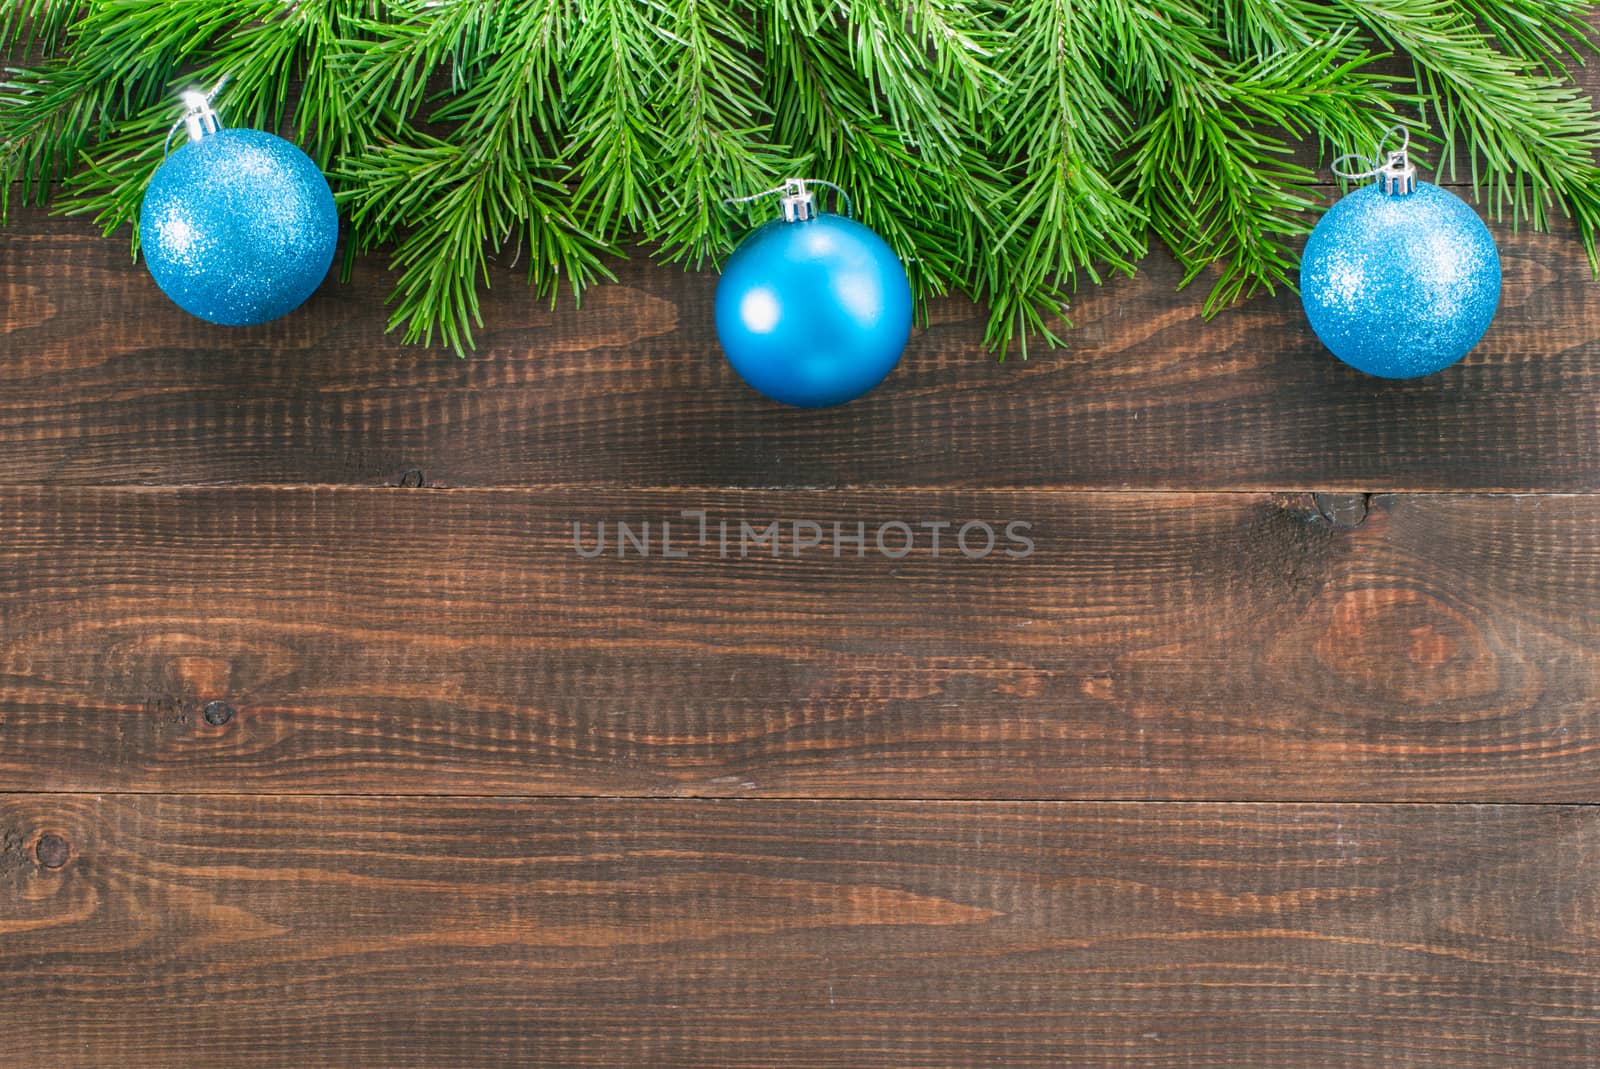 Christmas fir tree with decoration on dark wooden board background. Border art design with Christmas tree and blue baubles. Xmas and new year concept with copy space